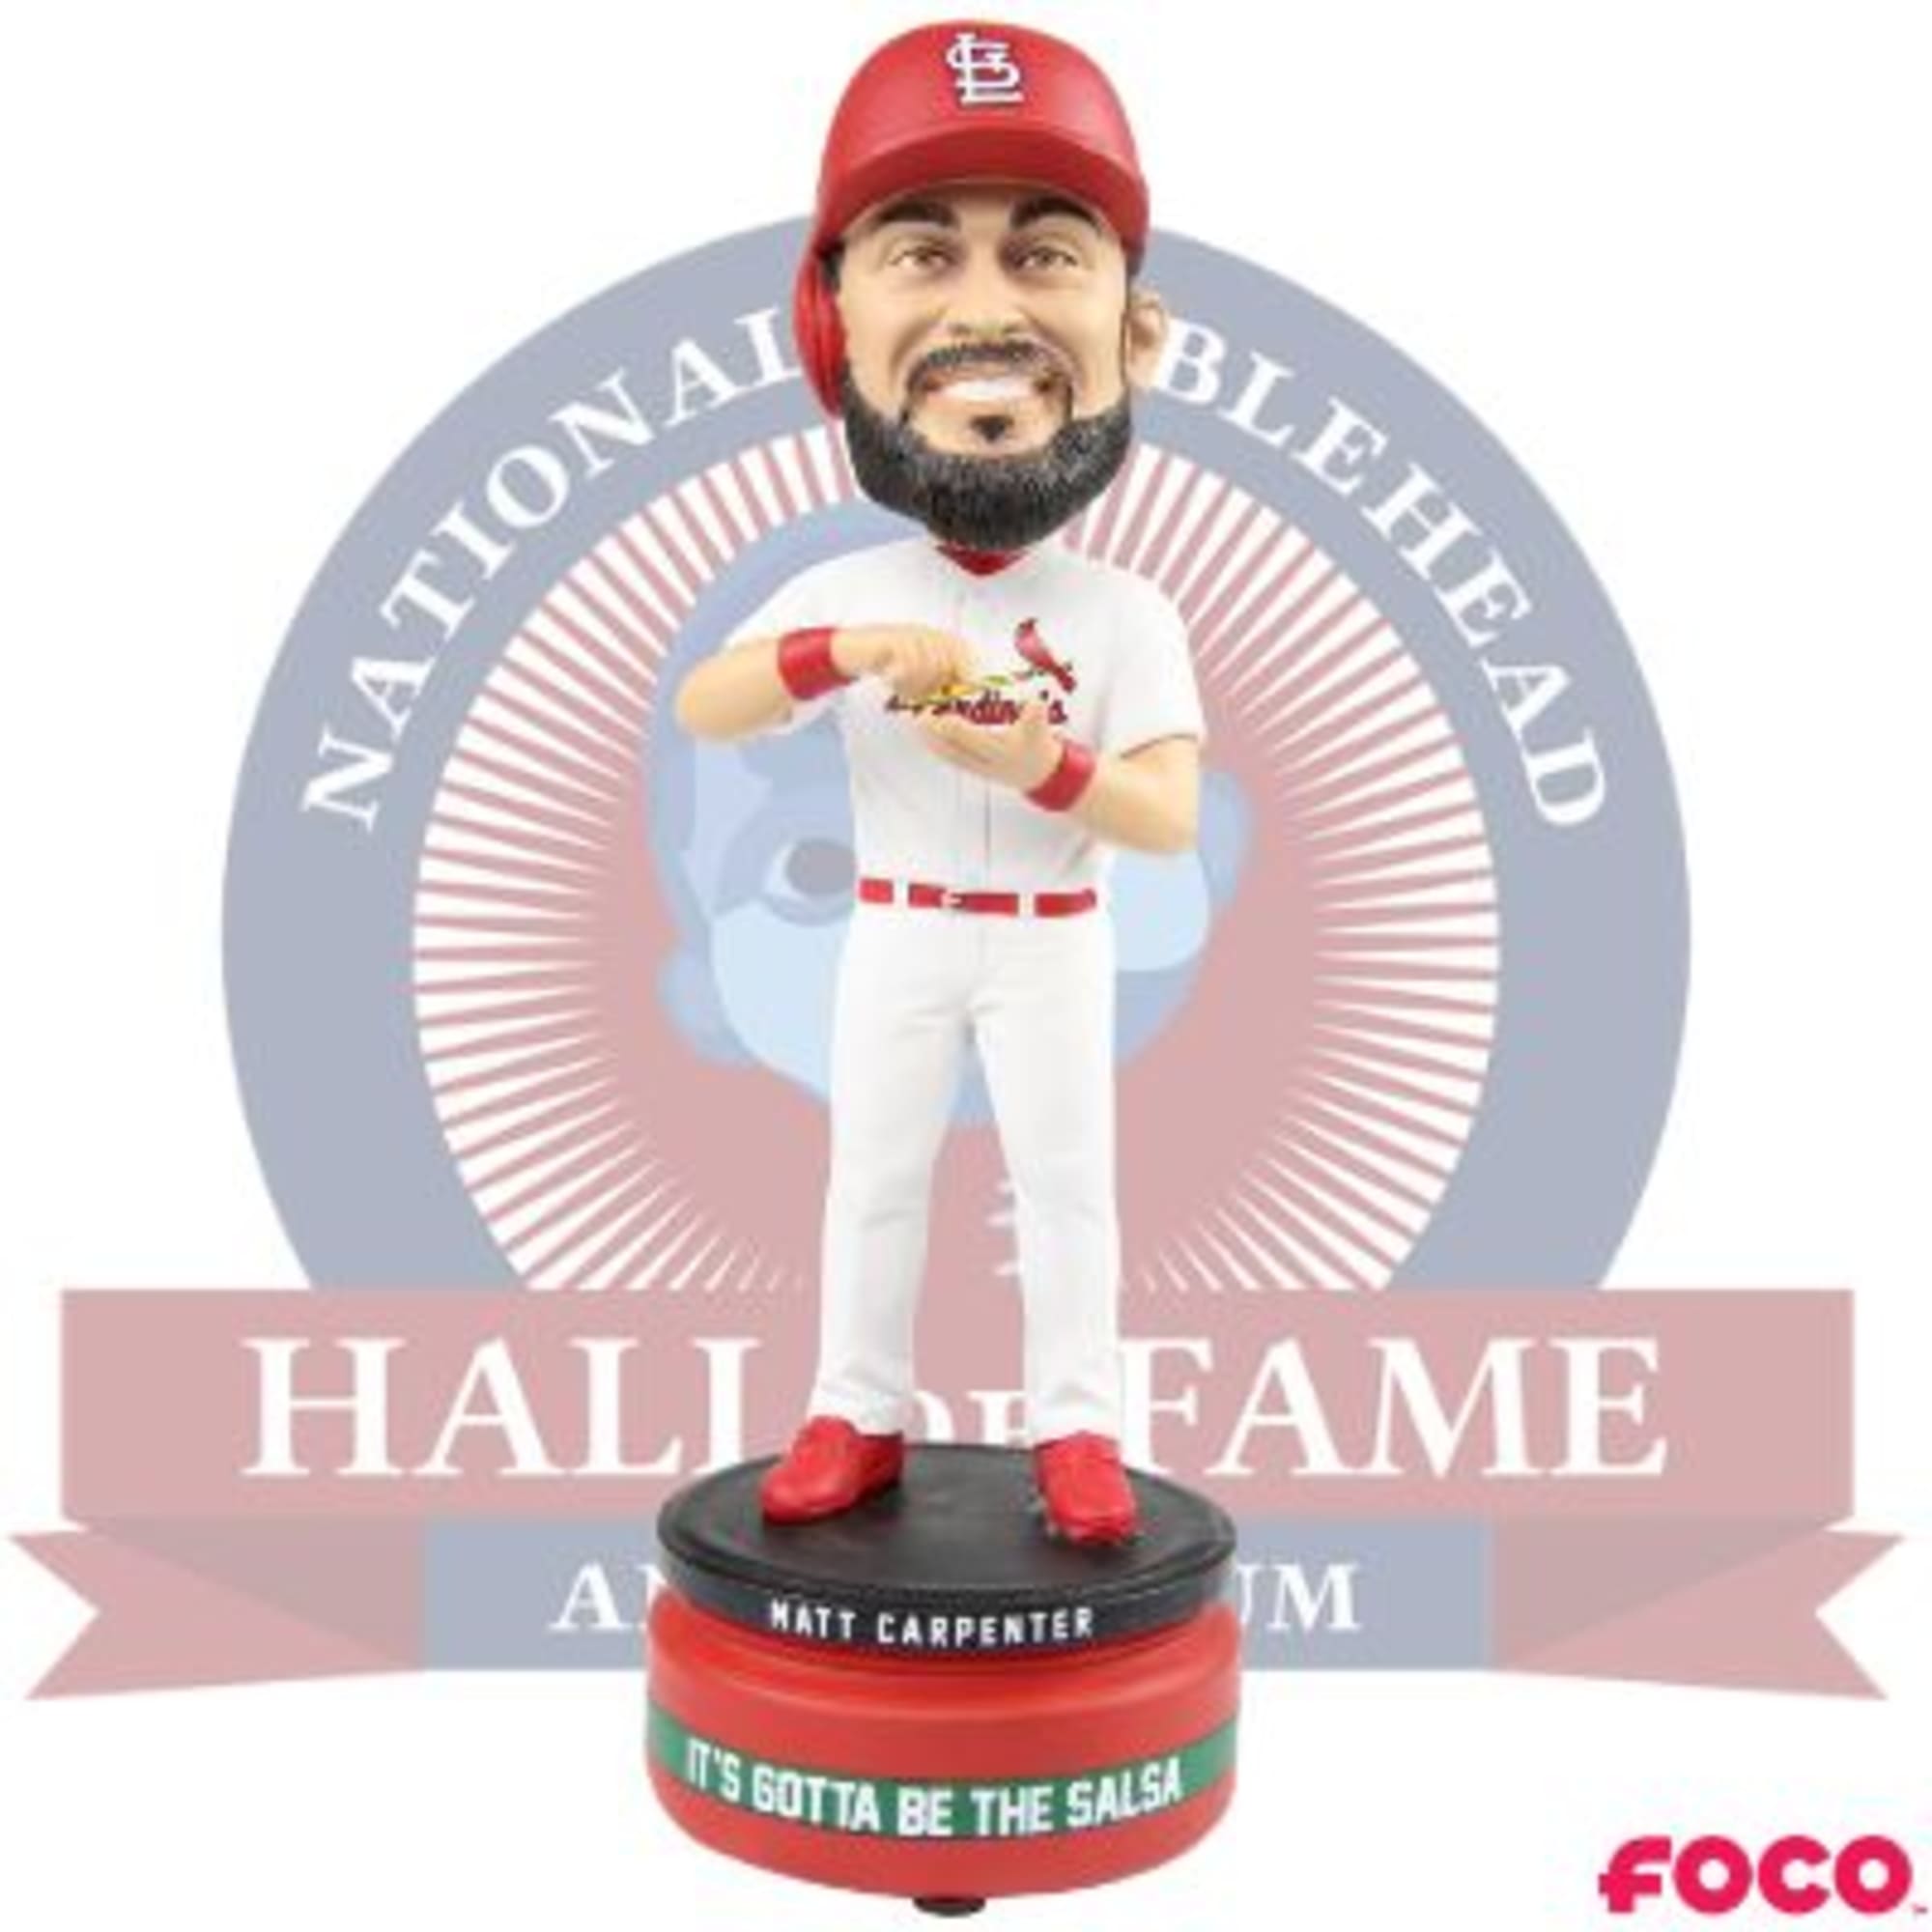 FLASH SALE: Save 15% on this St. Louis Cardinals bobblehead